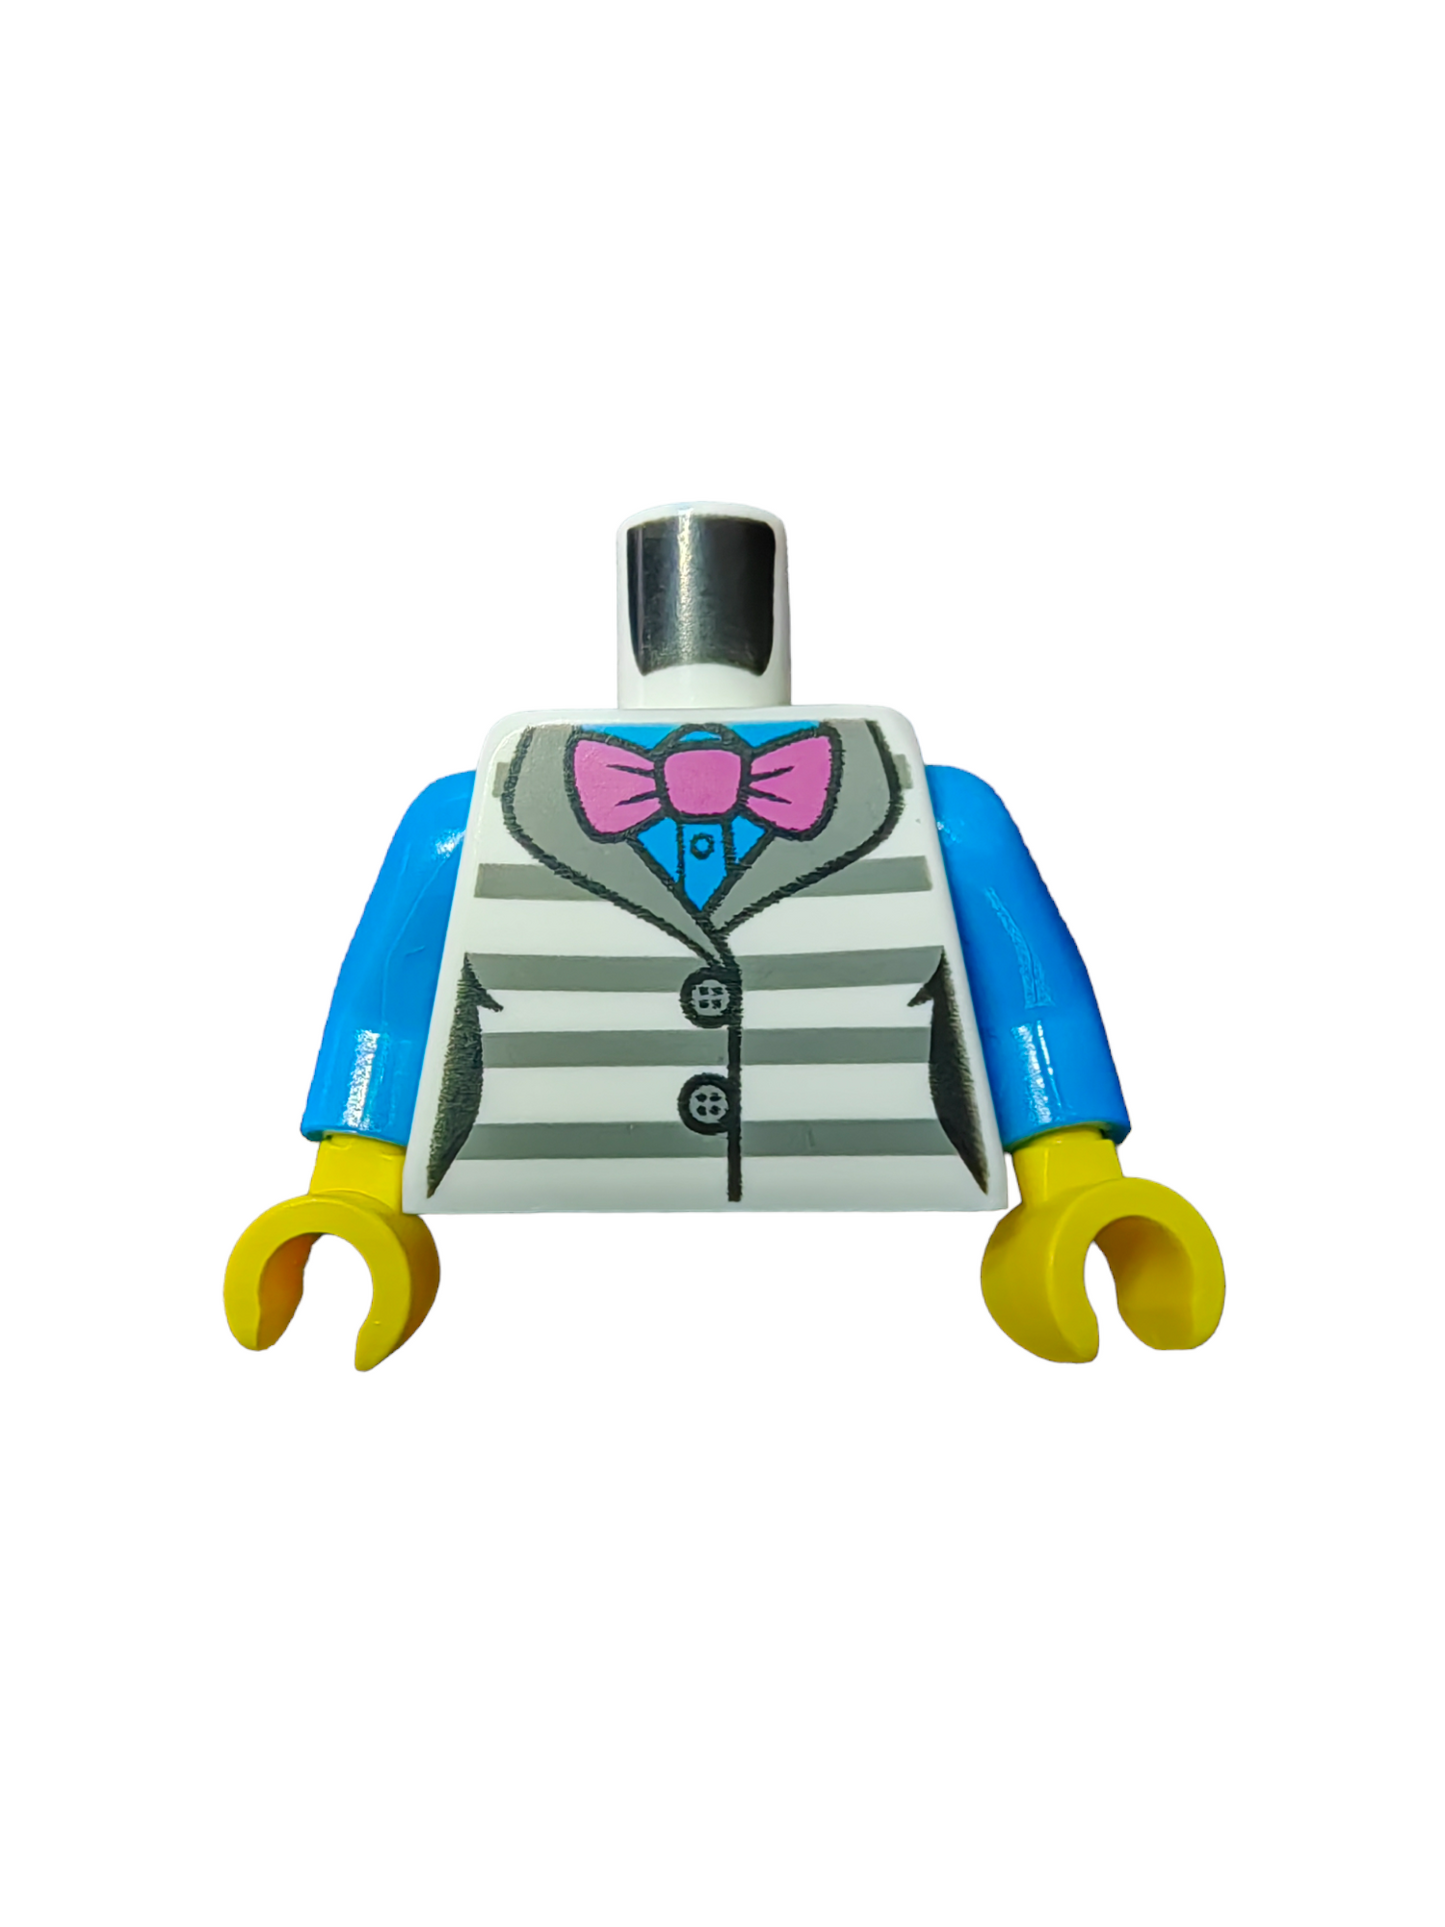 LEGO Torso, Jacket with Gray Prison Stripes over Azure Shirt, Pink Bow Tie - UB1120